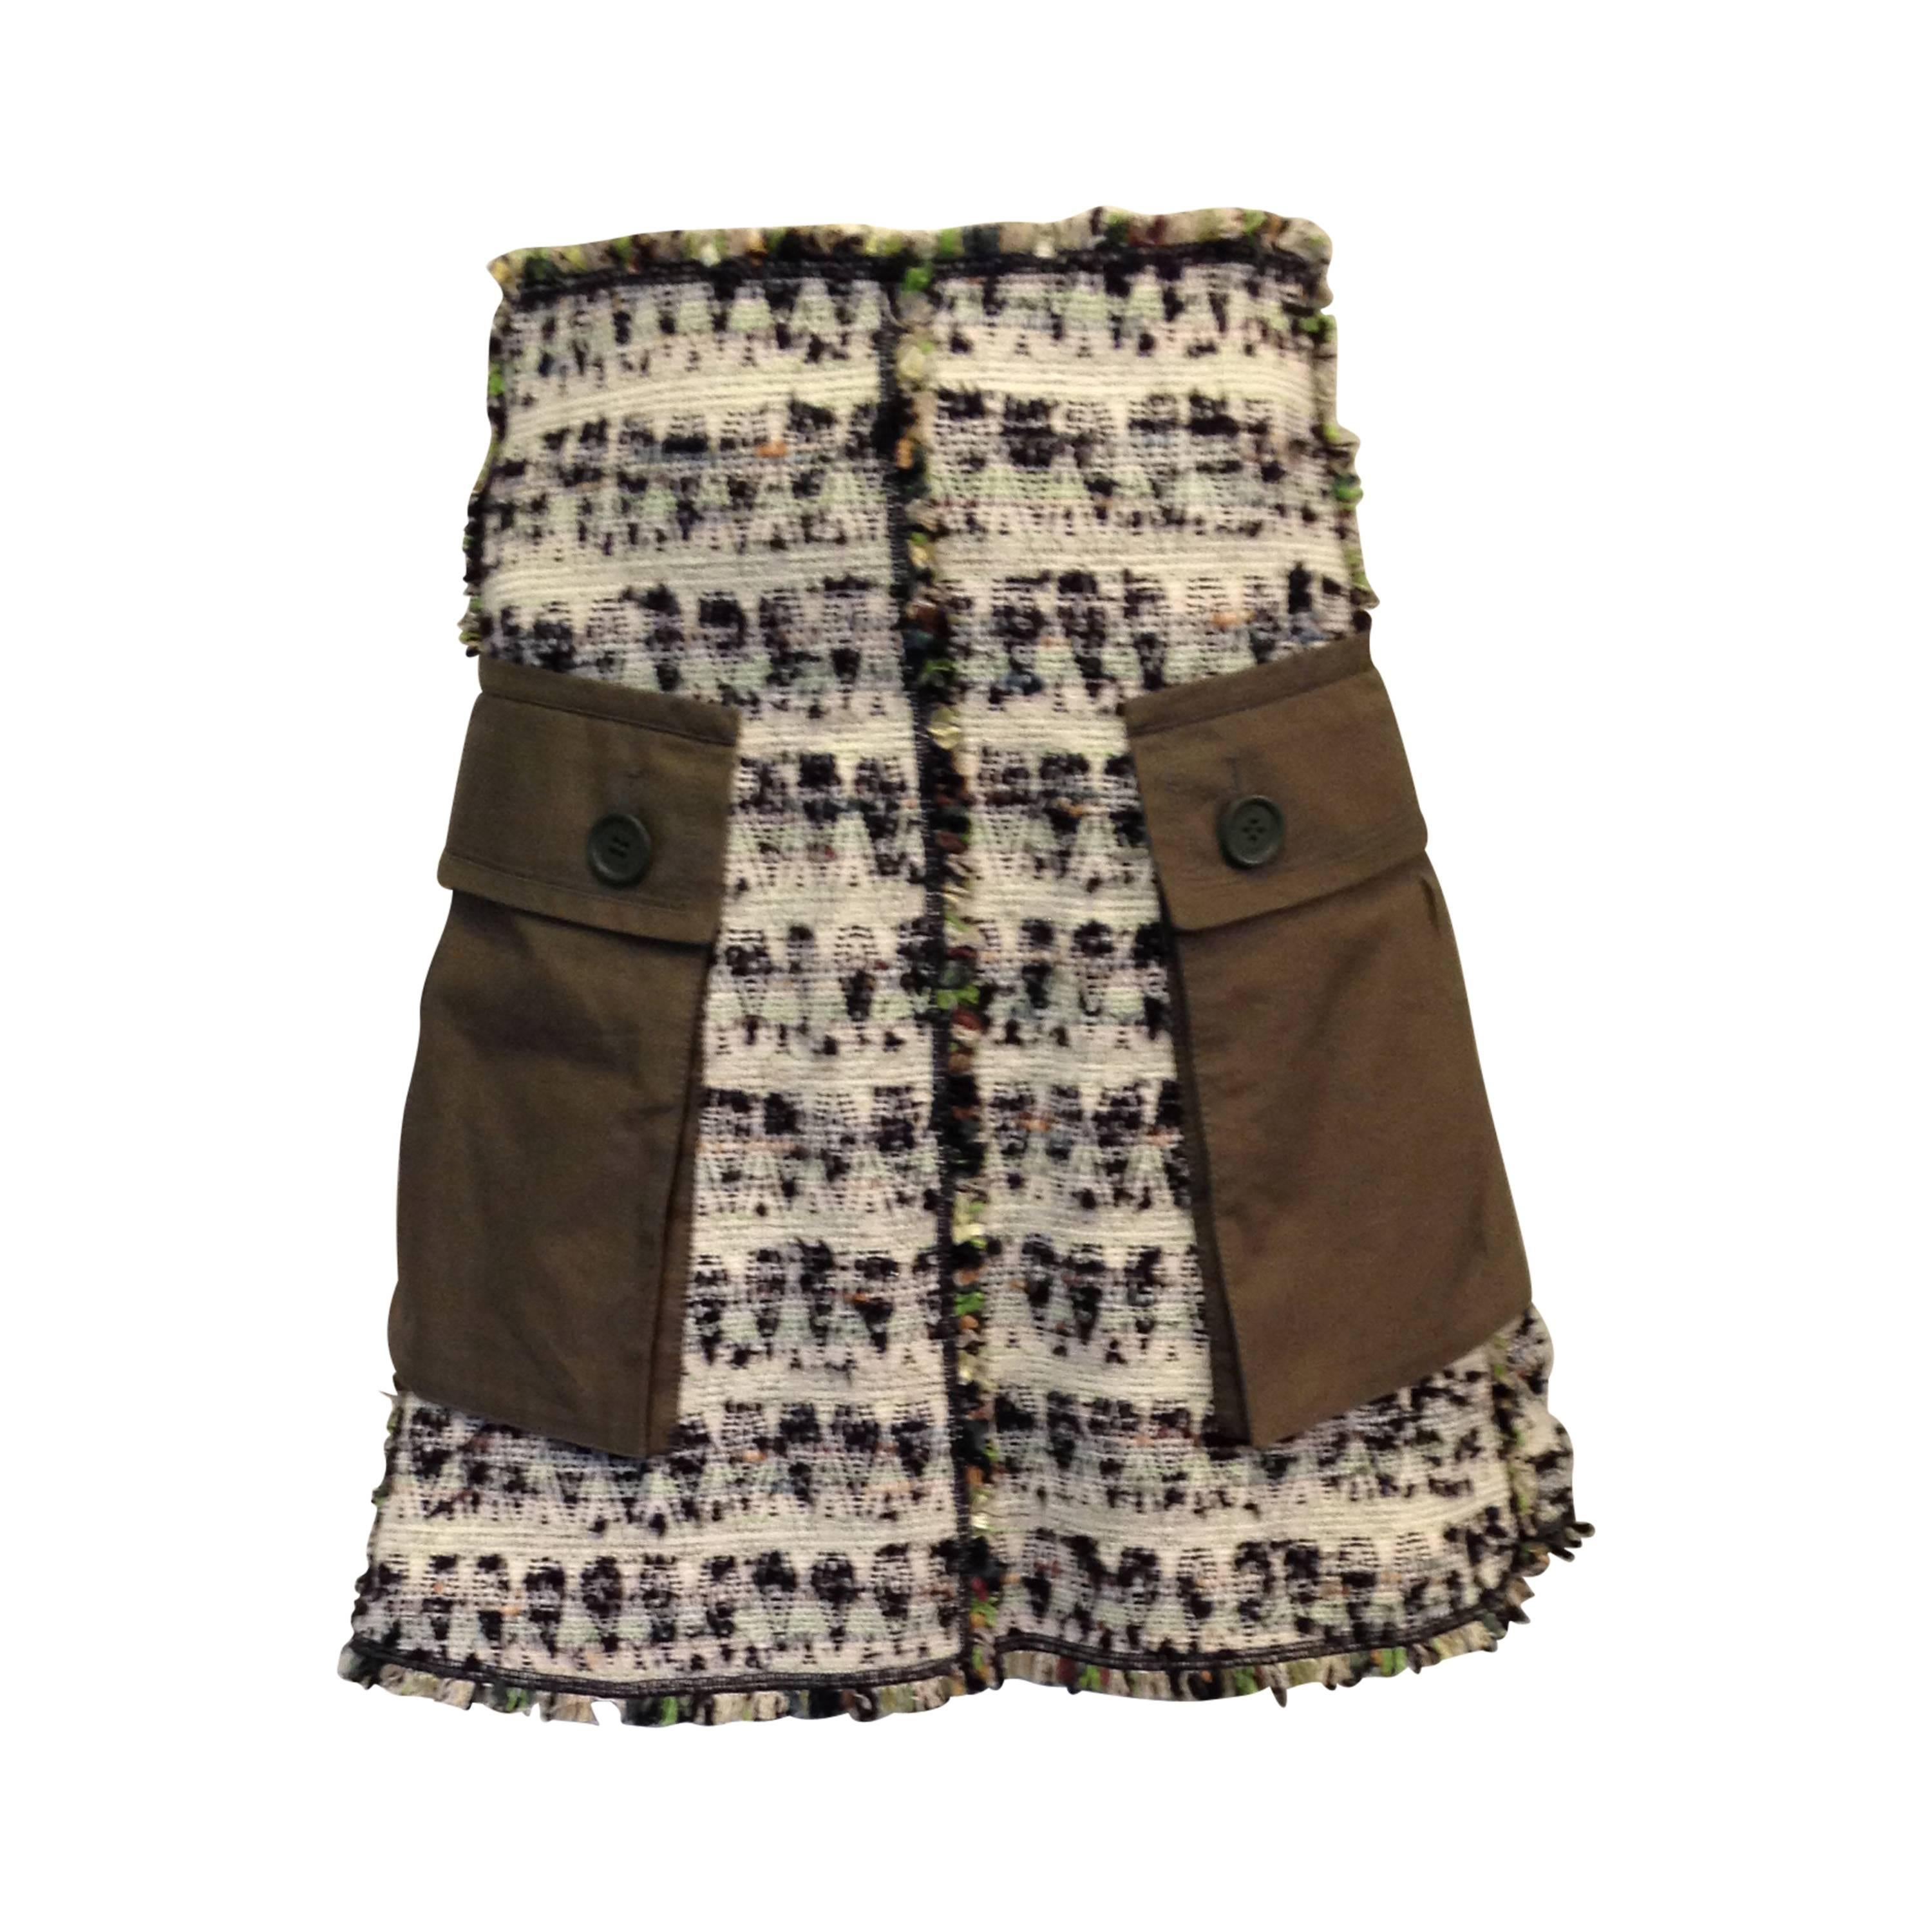 Louis Vuitton Cream and Olive Tweed Skirt Size 38 (6)